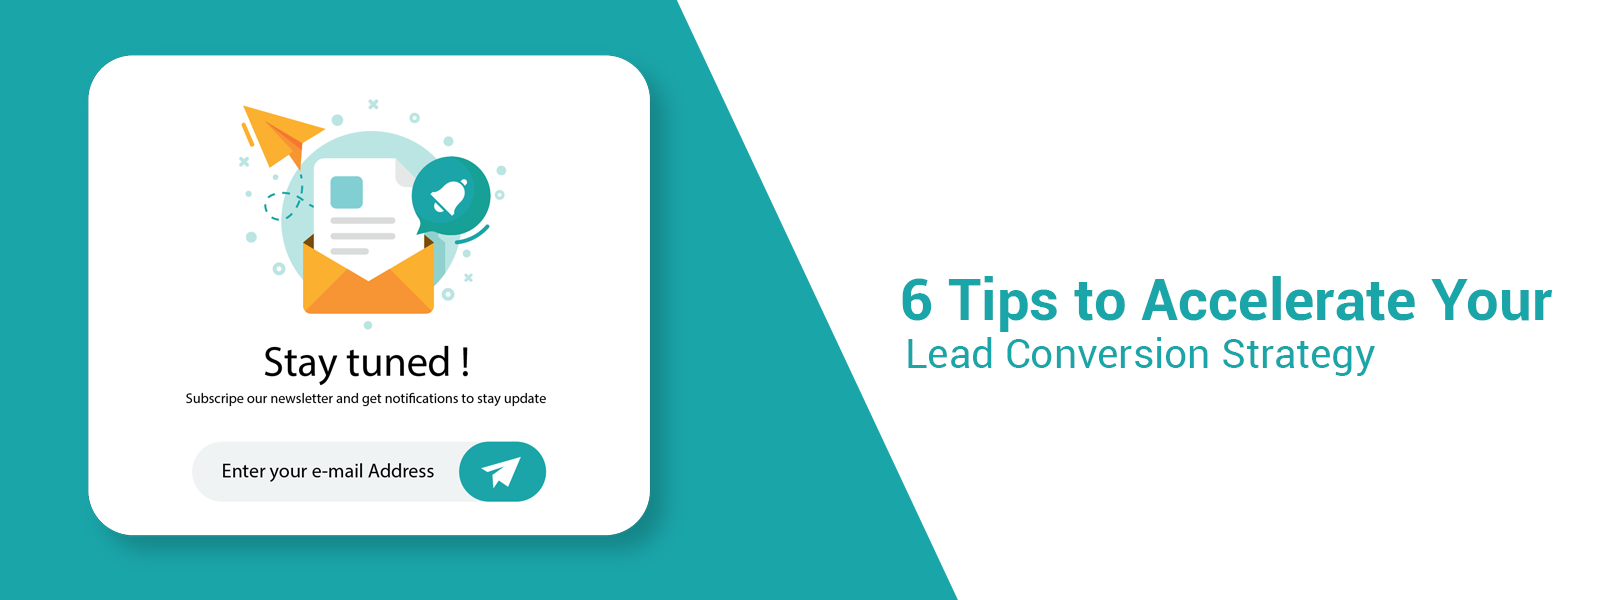 6 tips to accelerate your lead connversion strategy